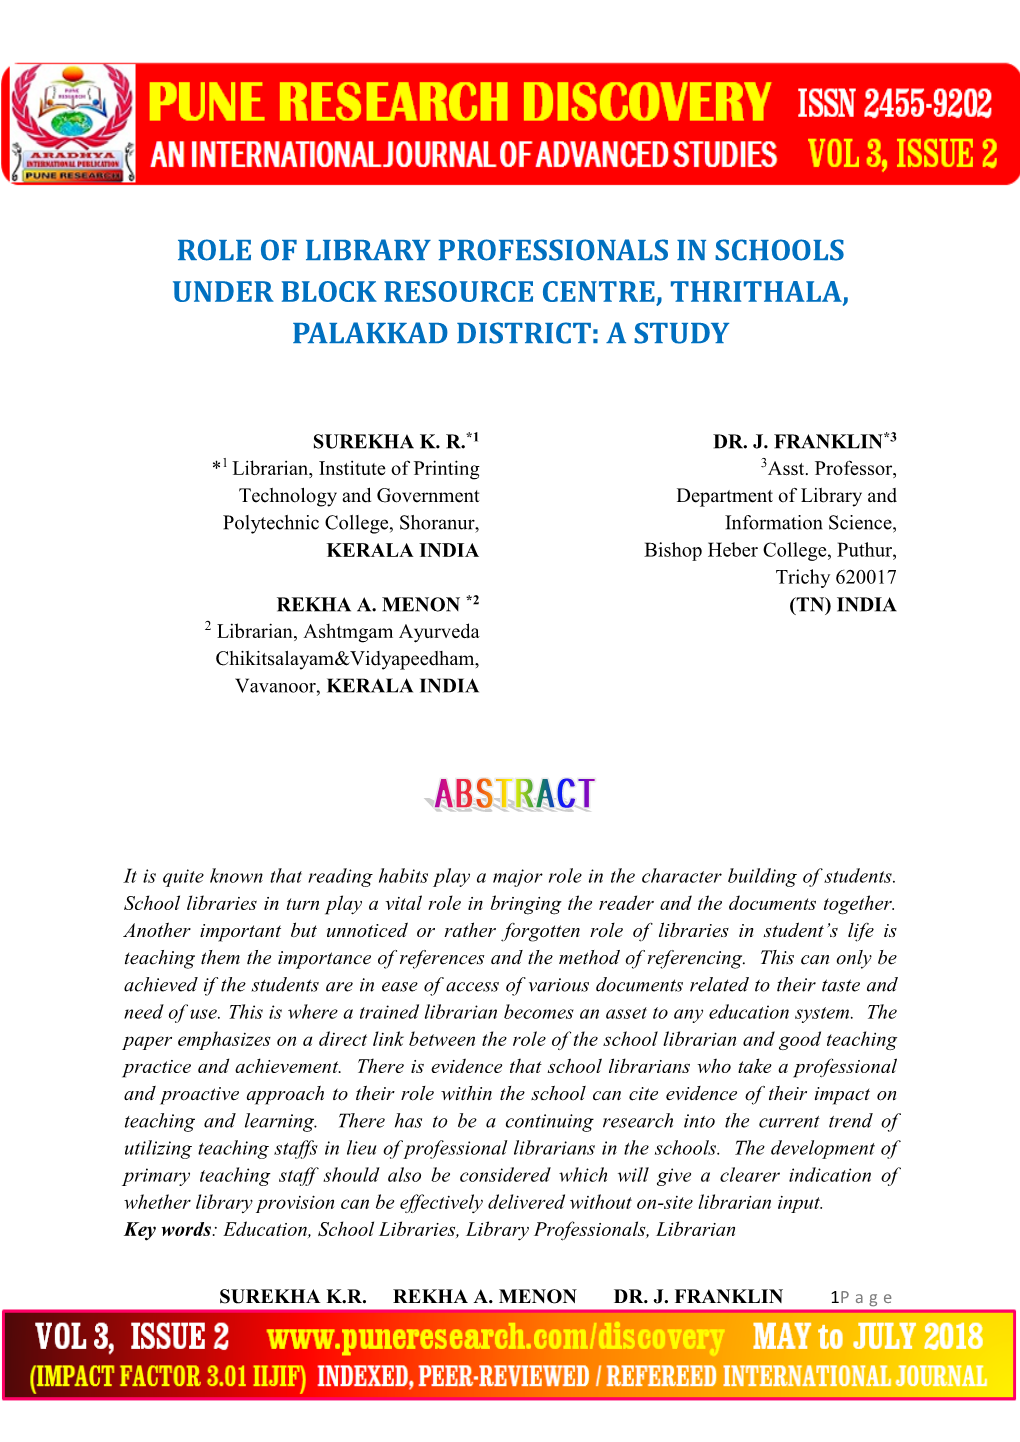 Role of Library Professionals in Schools Under Block Resource Centre, Thrithala, Palakkad District: a Study